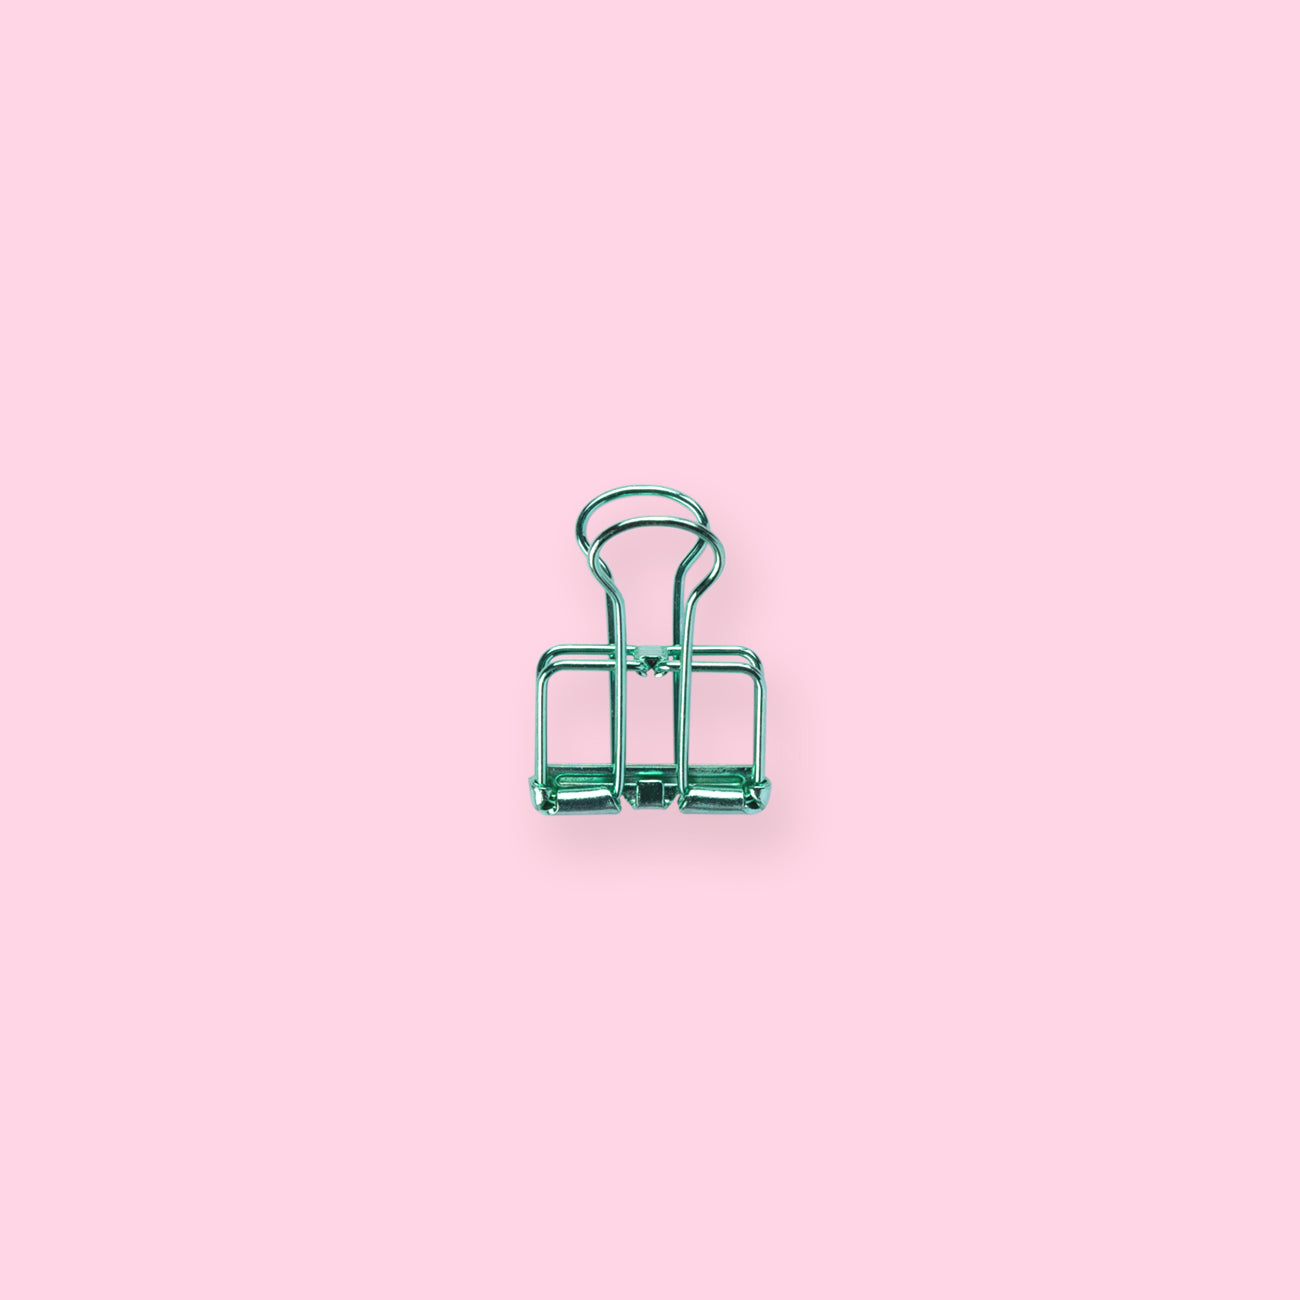 Hollow Skeleton Binder Paper Clip - Green - Small